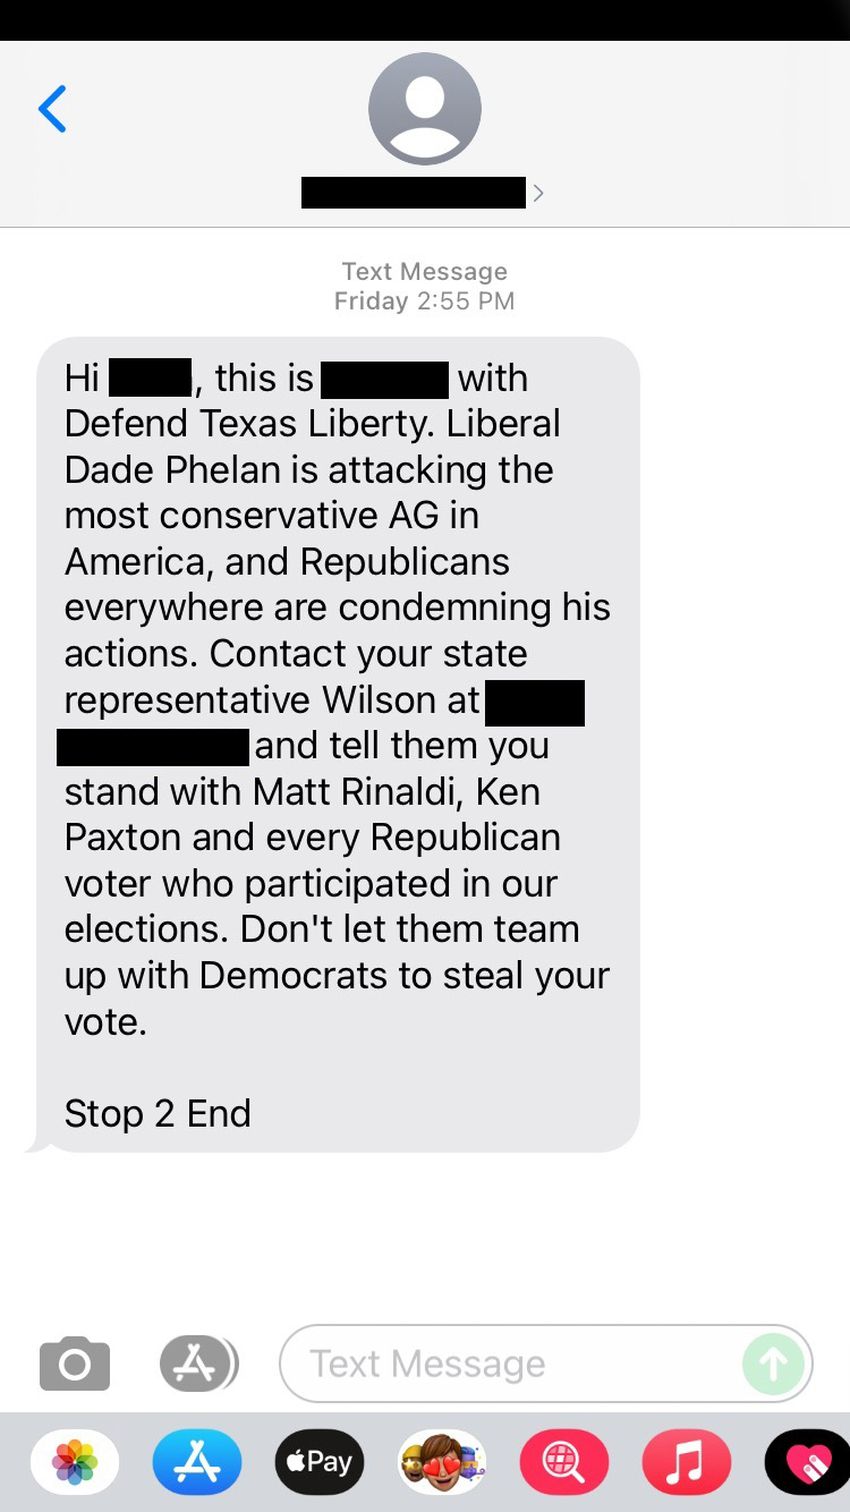 A screenshot of a text message sent by Defend Texas Liberty defending Ken Paxton the day before the Texas House impeachment vote.